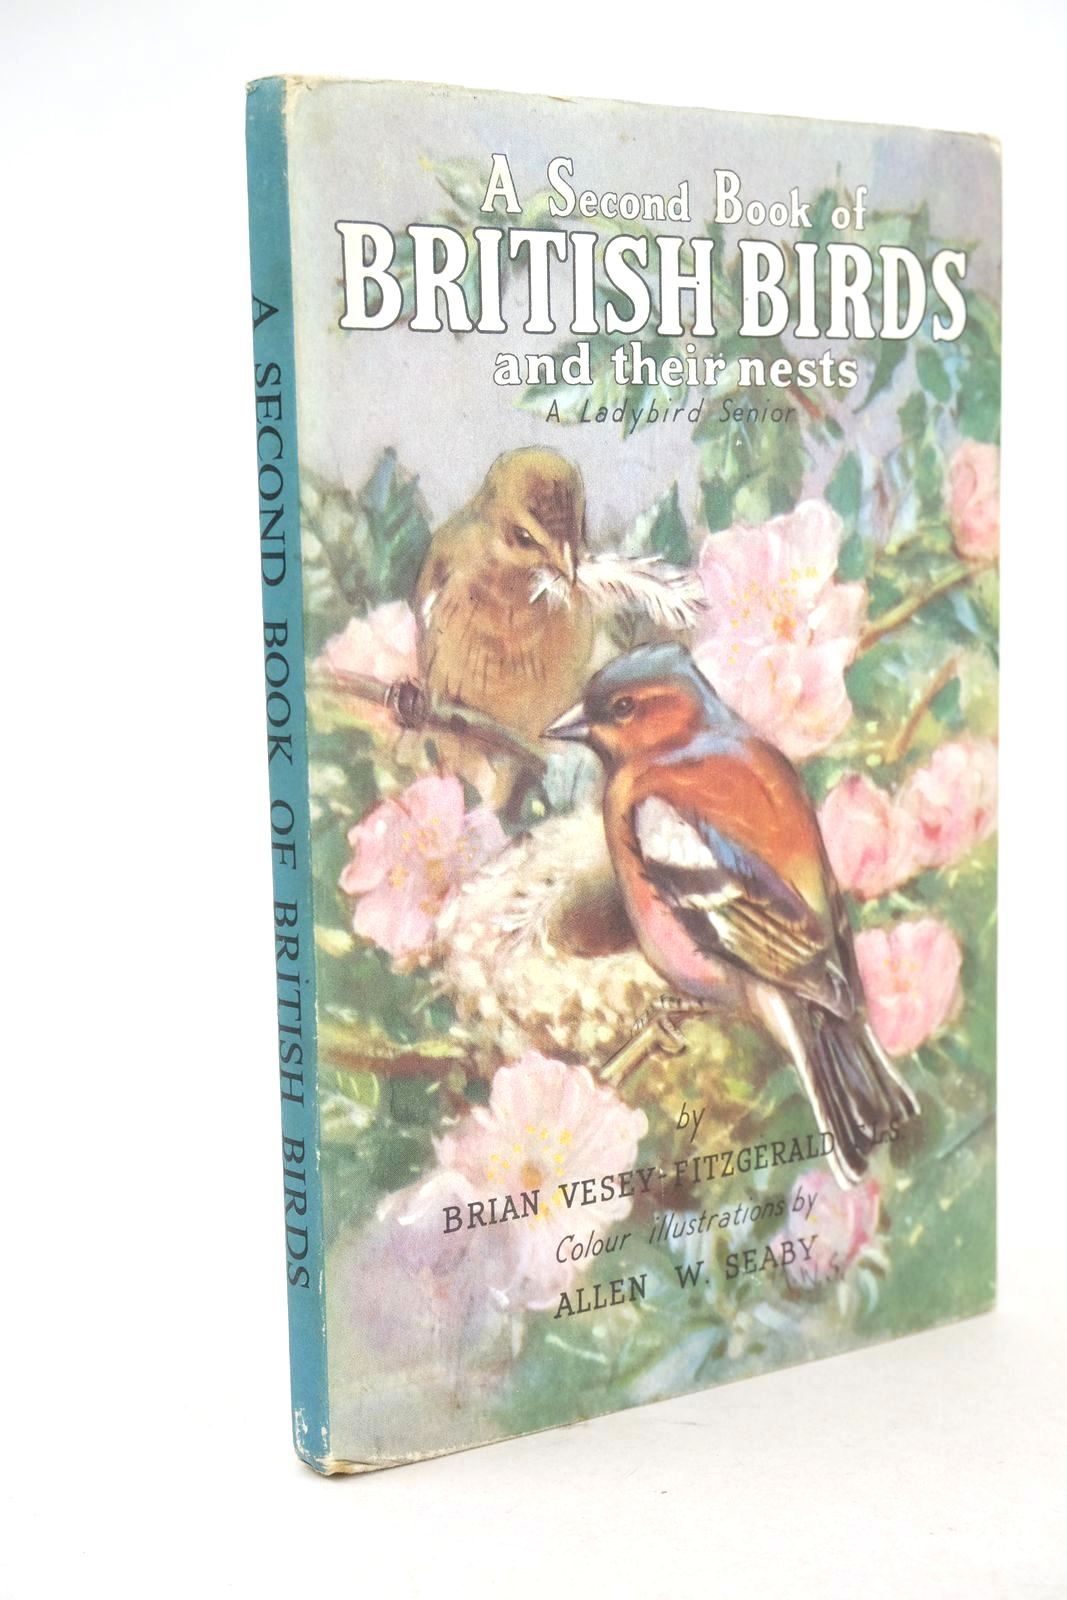 Photo of A SECOND BOOK OF BRITISH BIRDS AND THEIR NESTS written by Vesey-Fitzgerald, Brian illustrated by Seaby, Allen W. published by Wills &amp; Hepworth Ltd. (STOCK CODE: 1325754)  for sale by Stella & Rose's Books